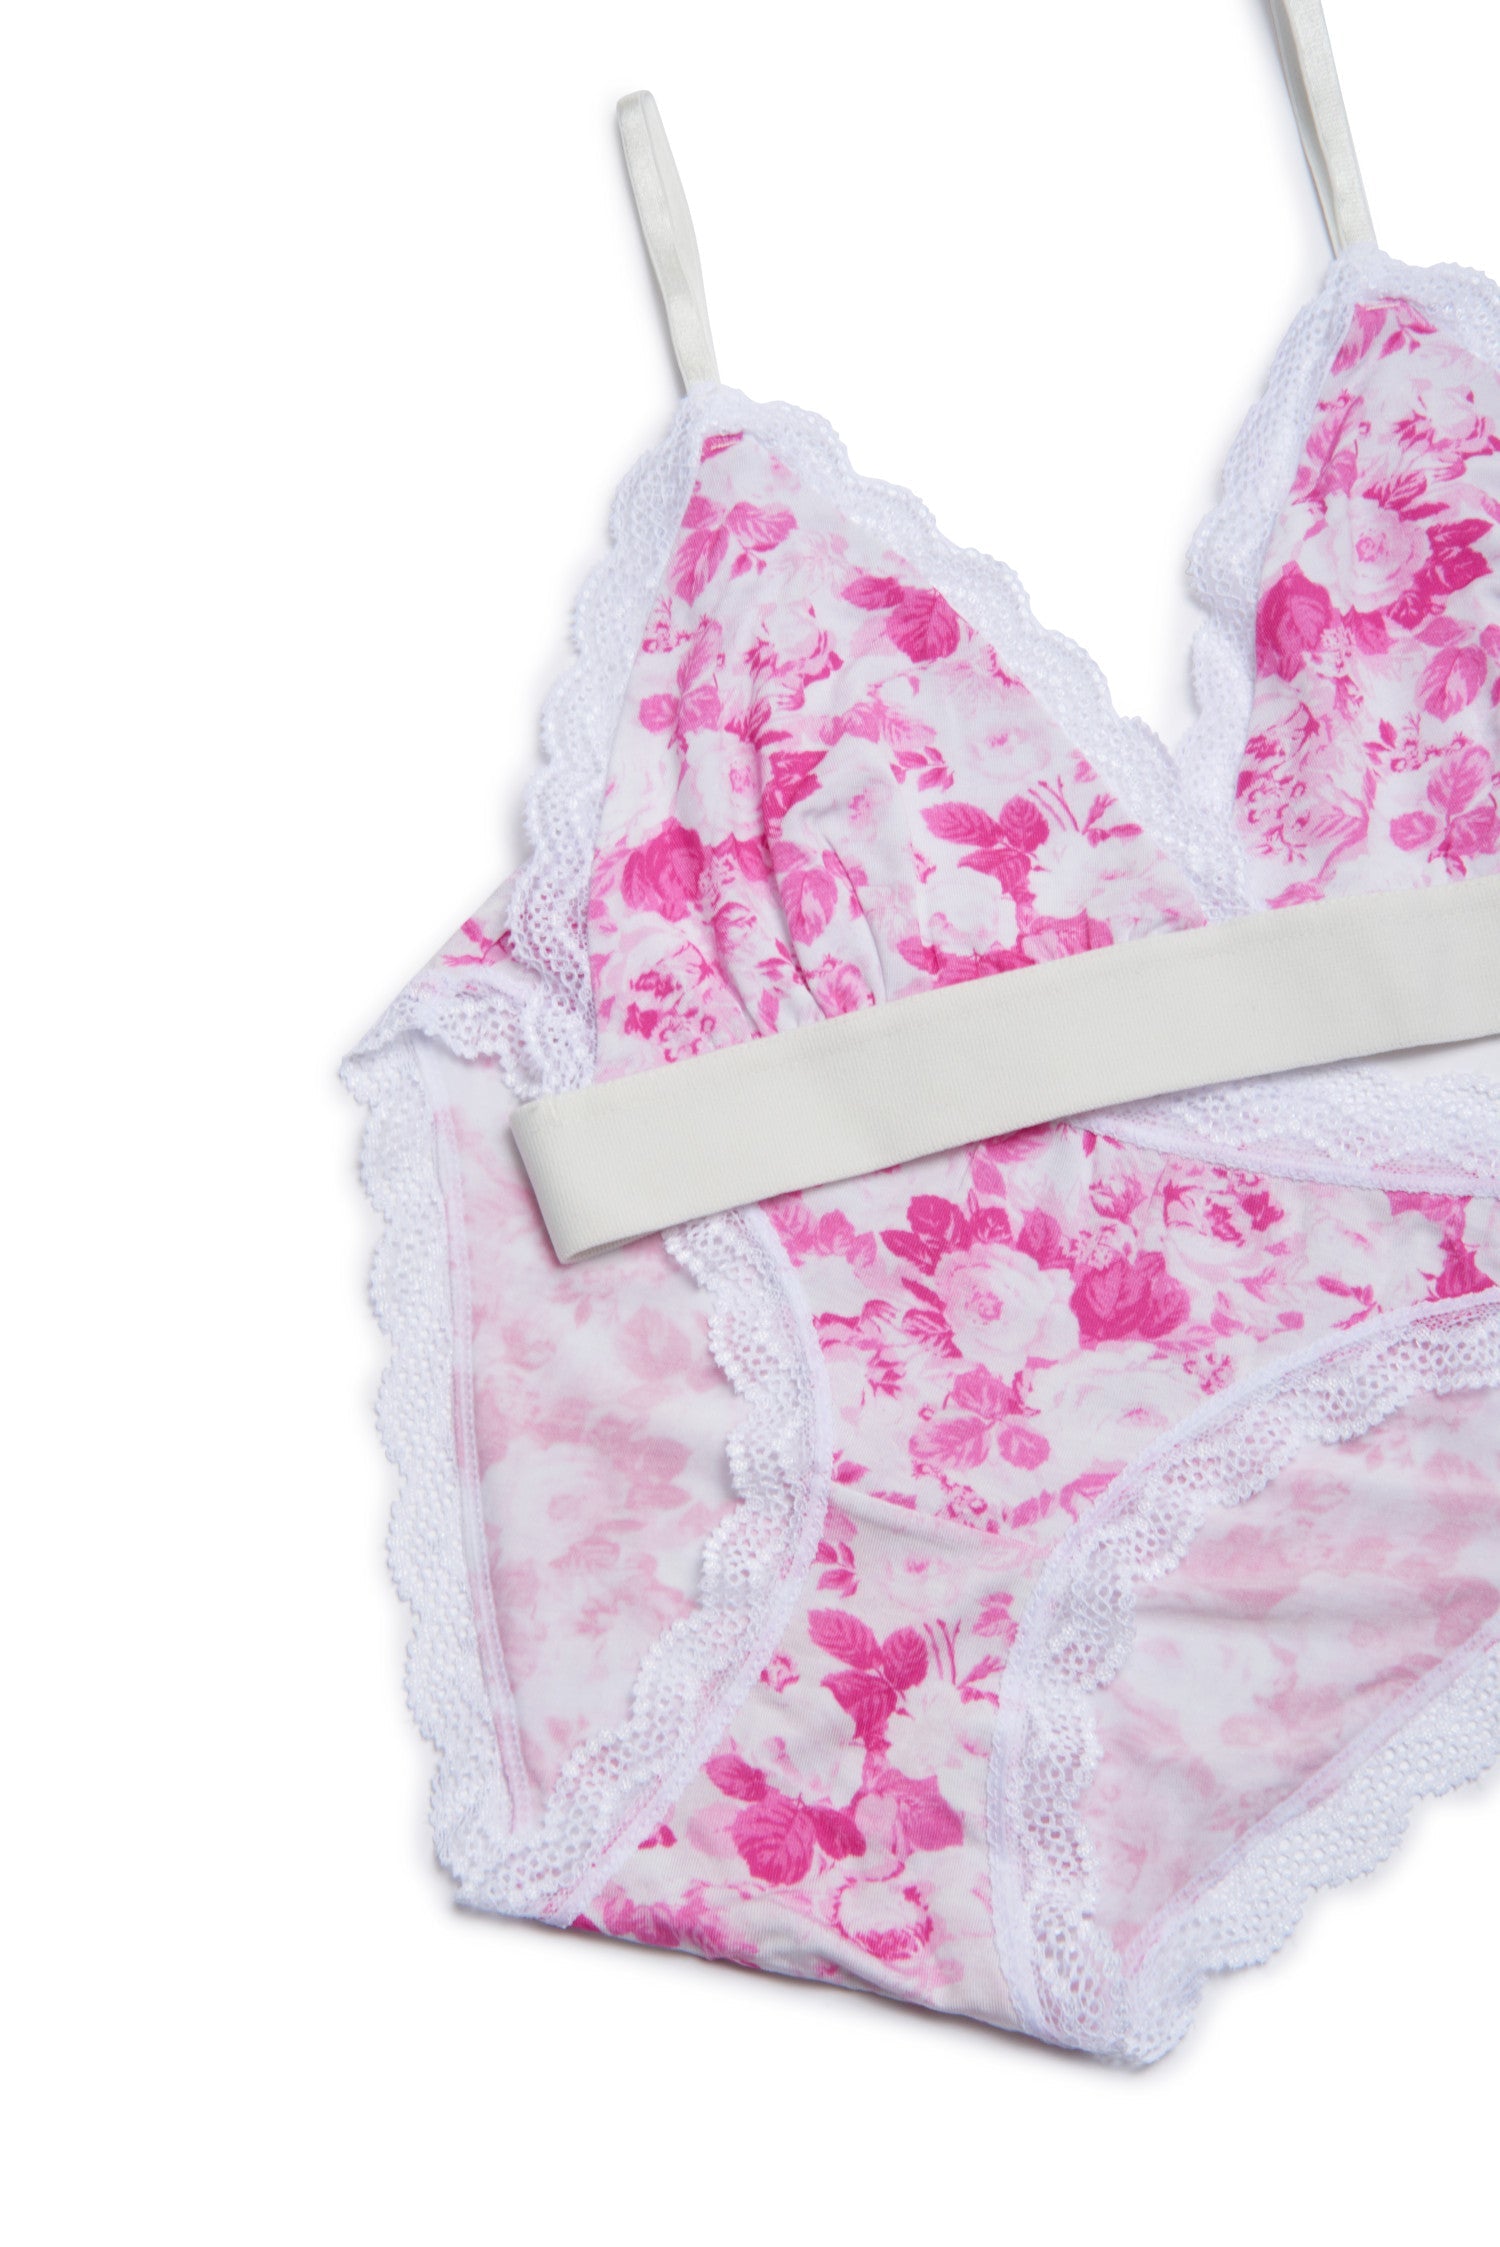 Womens sustainable pink floral lace bralette and knicker set